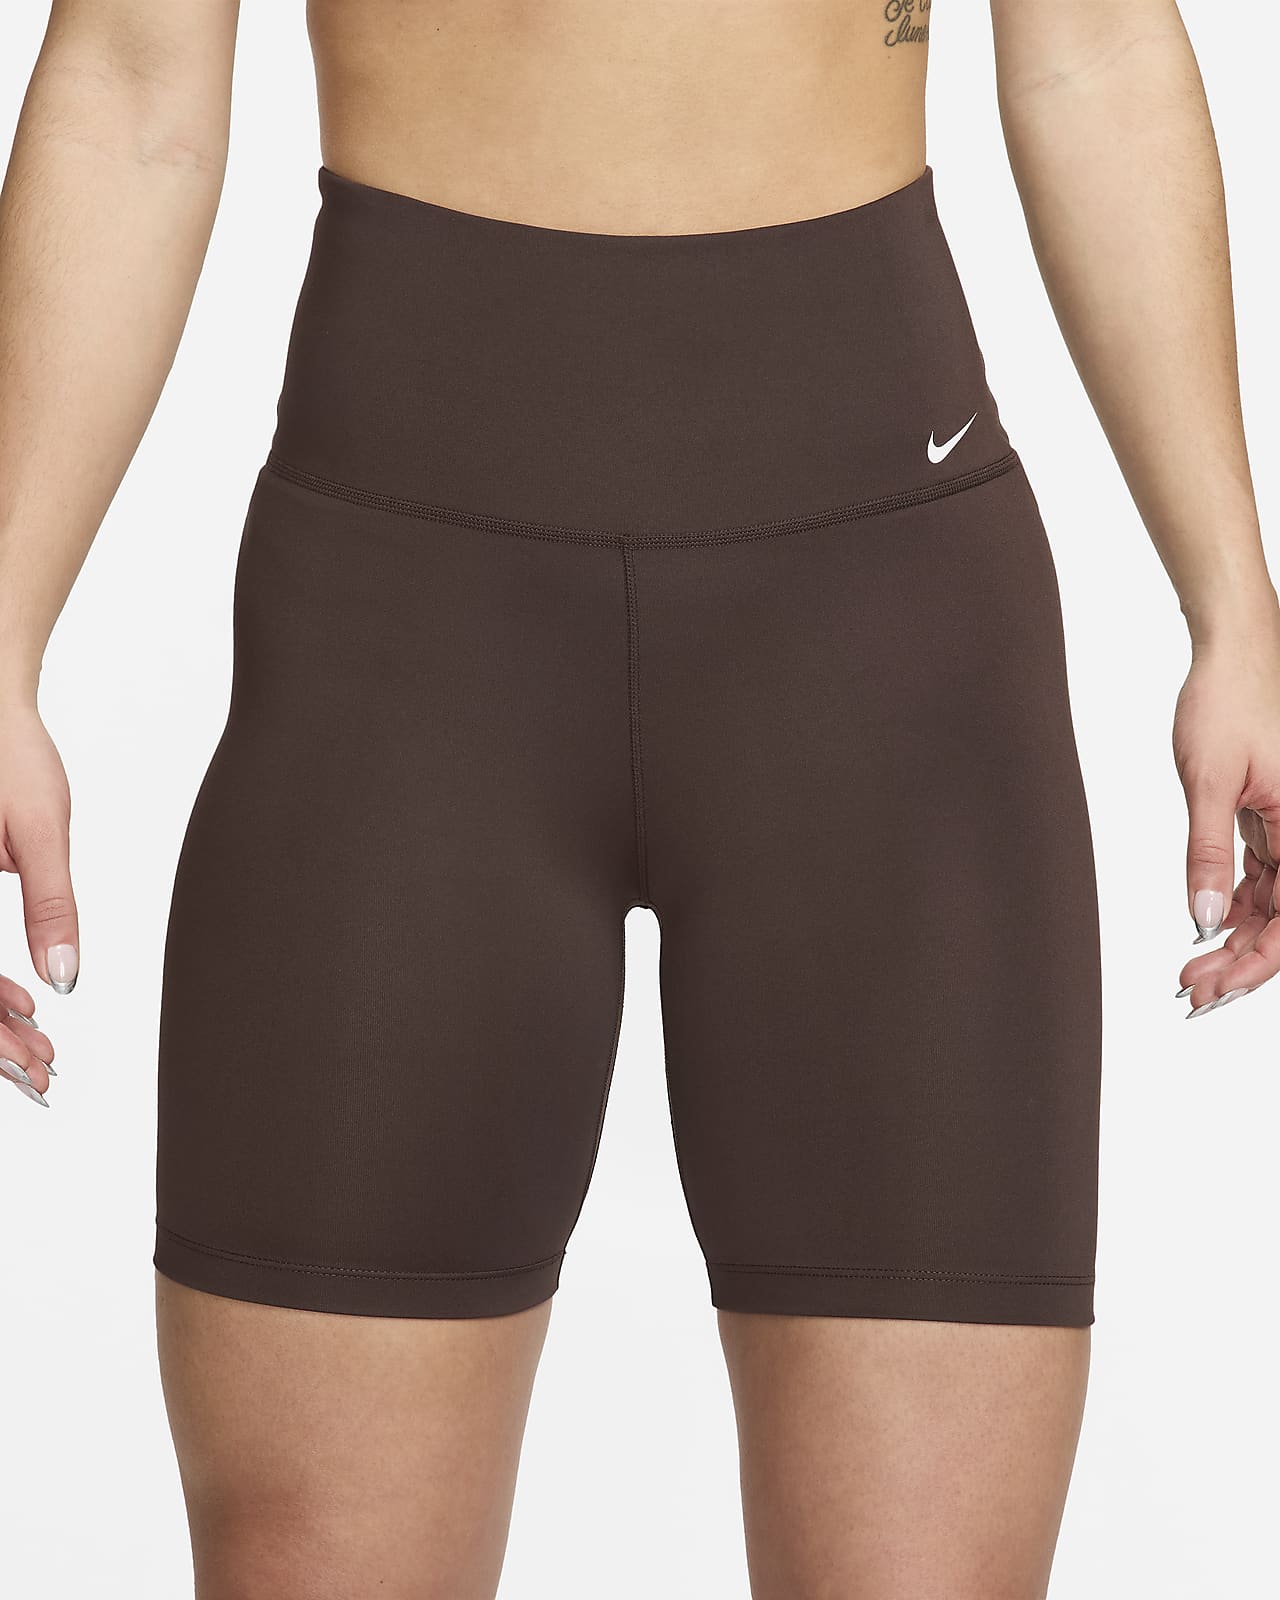 Nike Dri-Fit Women's Shorts With Built-in Underwear Size Large